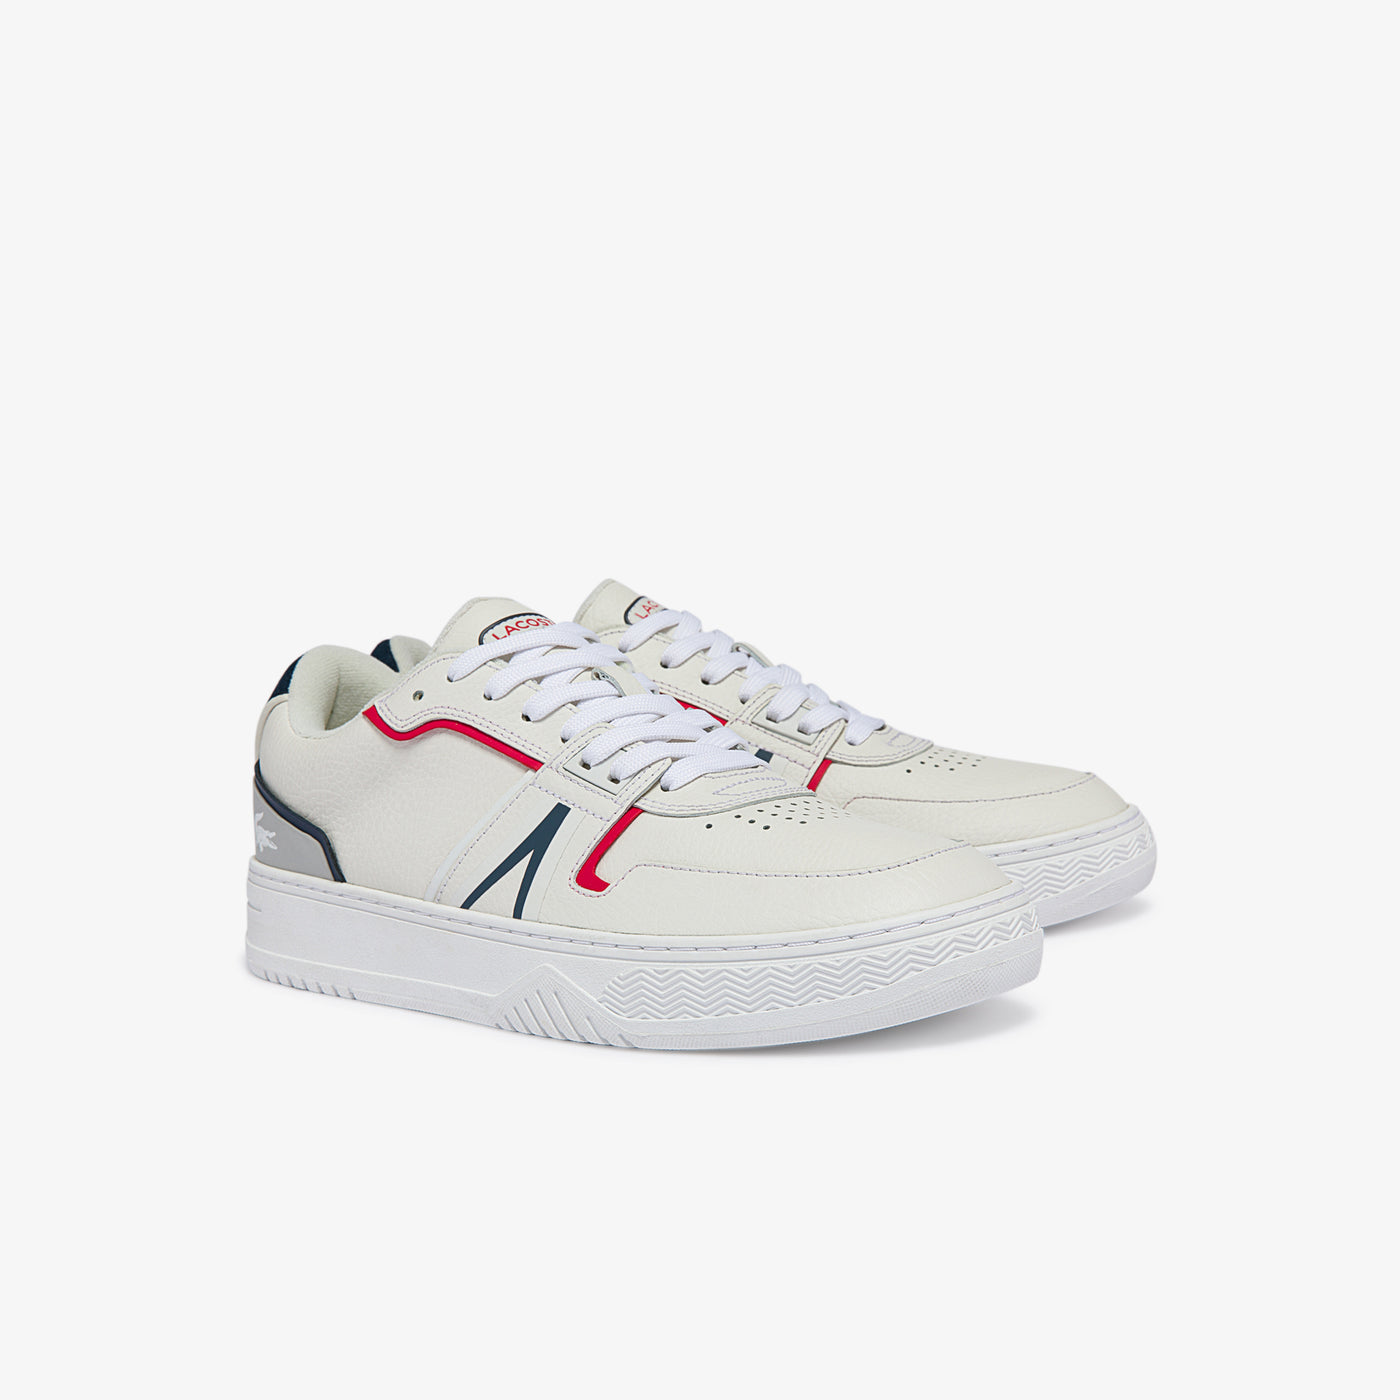 Shop The Latest Collection Of Lacoste Men'S L001 Leather Sneakers - 42Sma0092 In Lebanon